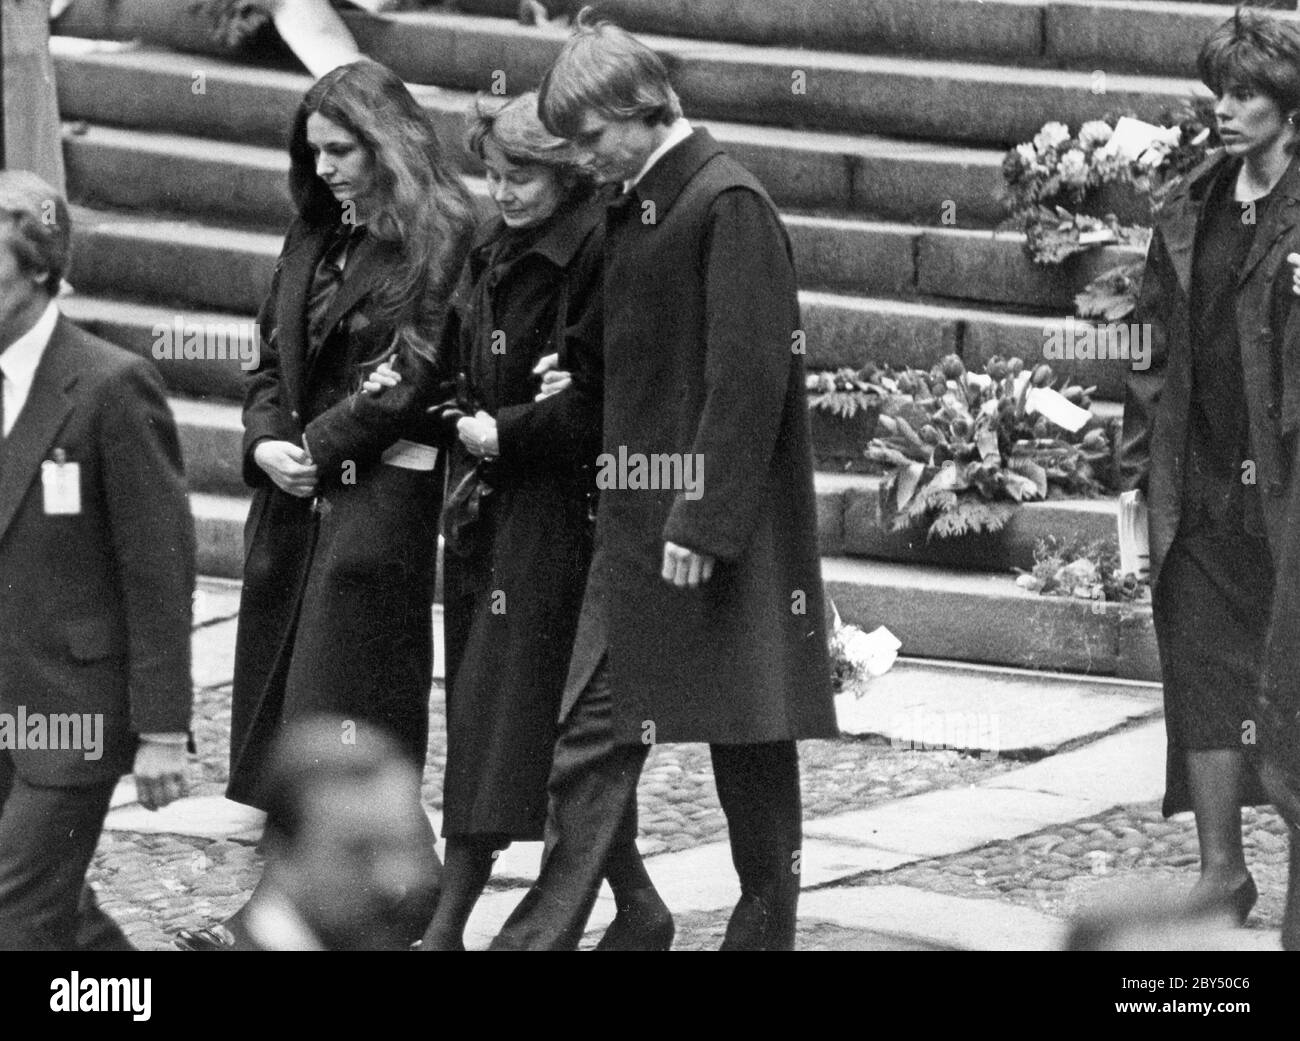 Olof Palme. Swedish social democratic politican and prime minister. Born october 14 1927. Murdered february 28 1985. Picture taken in connection with his funeral March 15 1986. Olof Palmes wife Lisbet and his son Mårten. Stock Photo